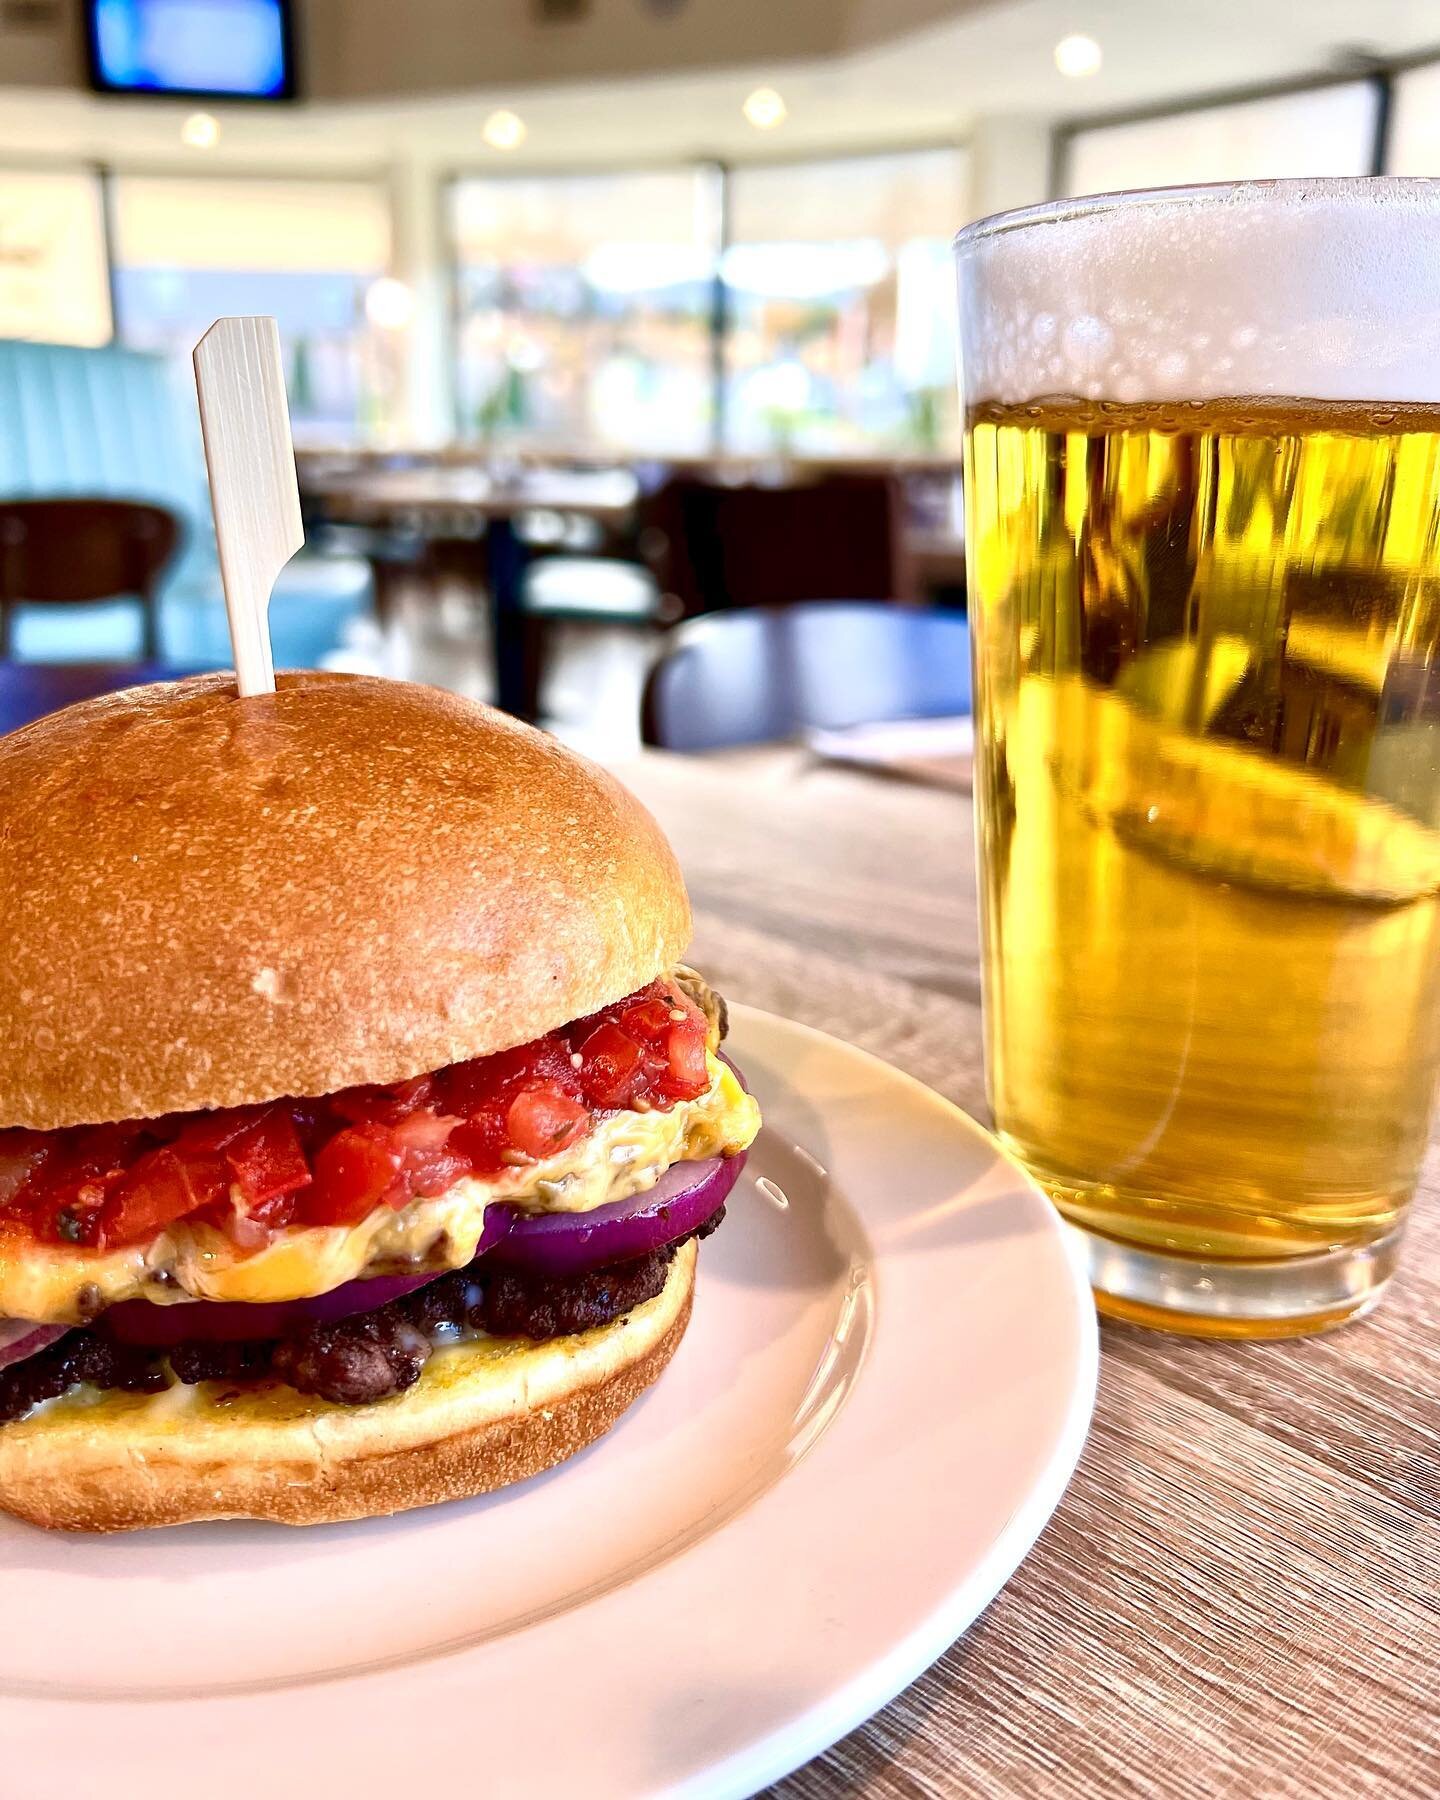 Now THAT&rsquo;s a burger! 🍔 

Reserve your table online and grab a burger, fries &amp; beer for $14.